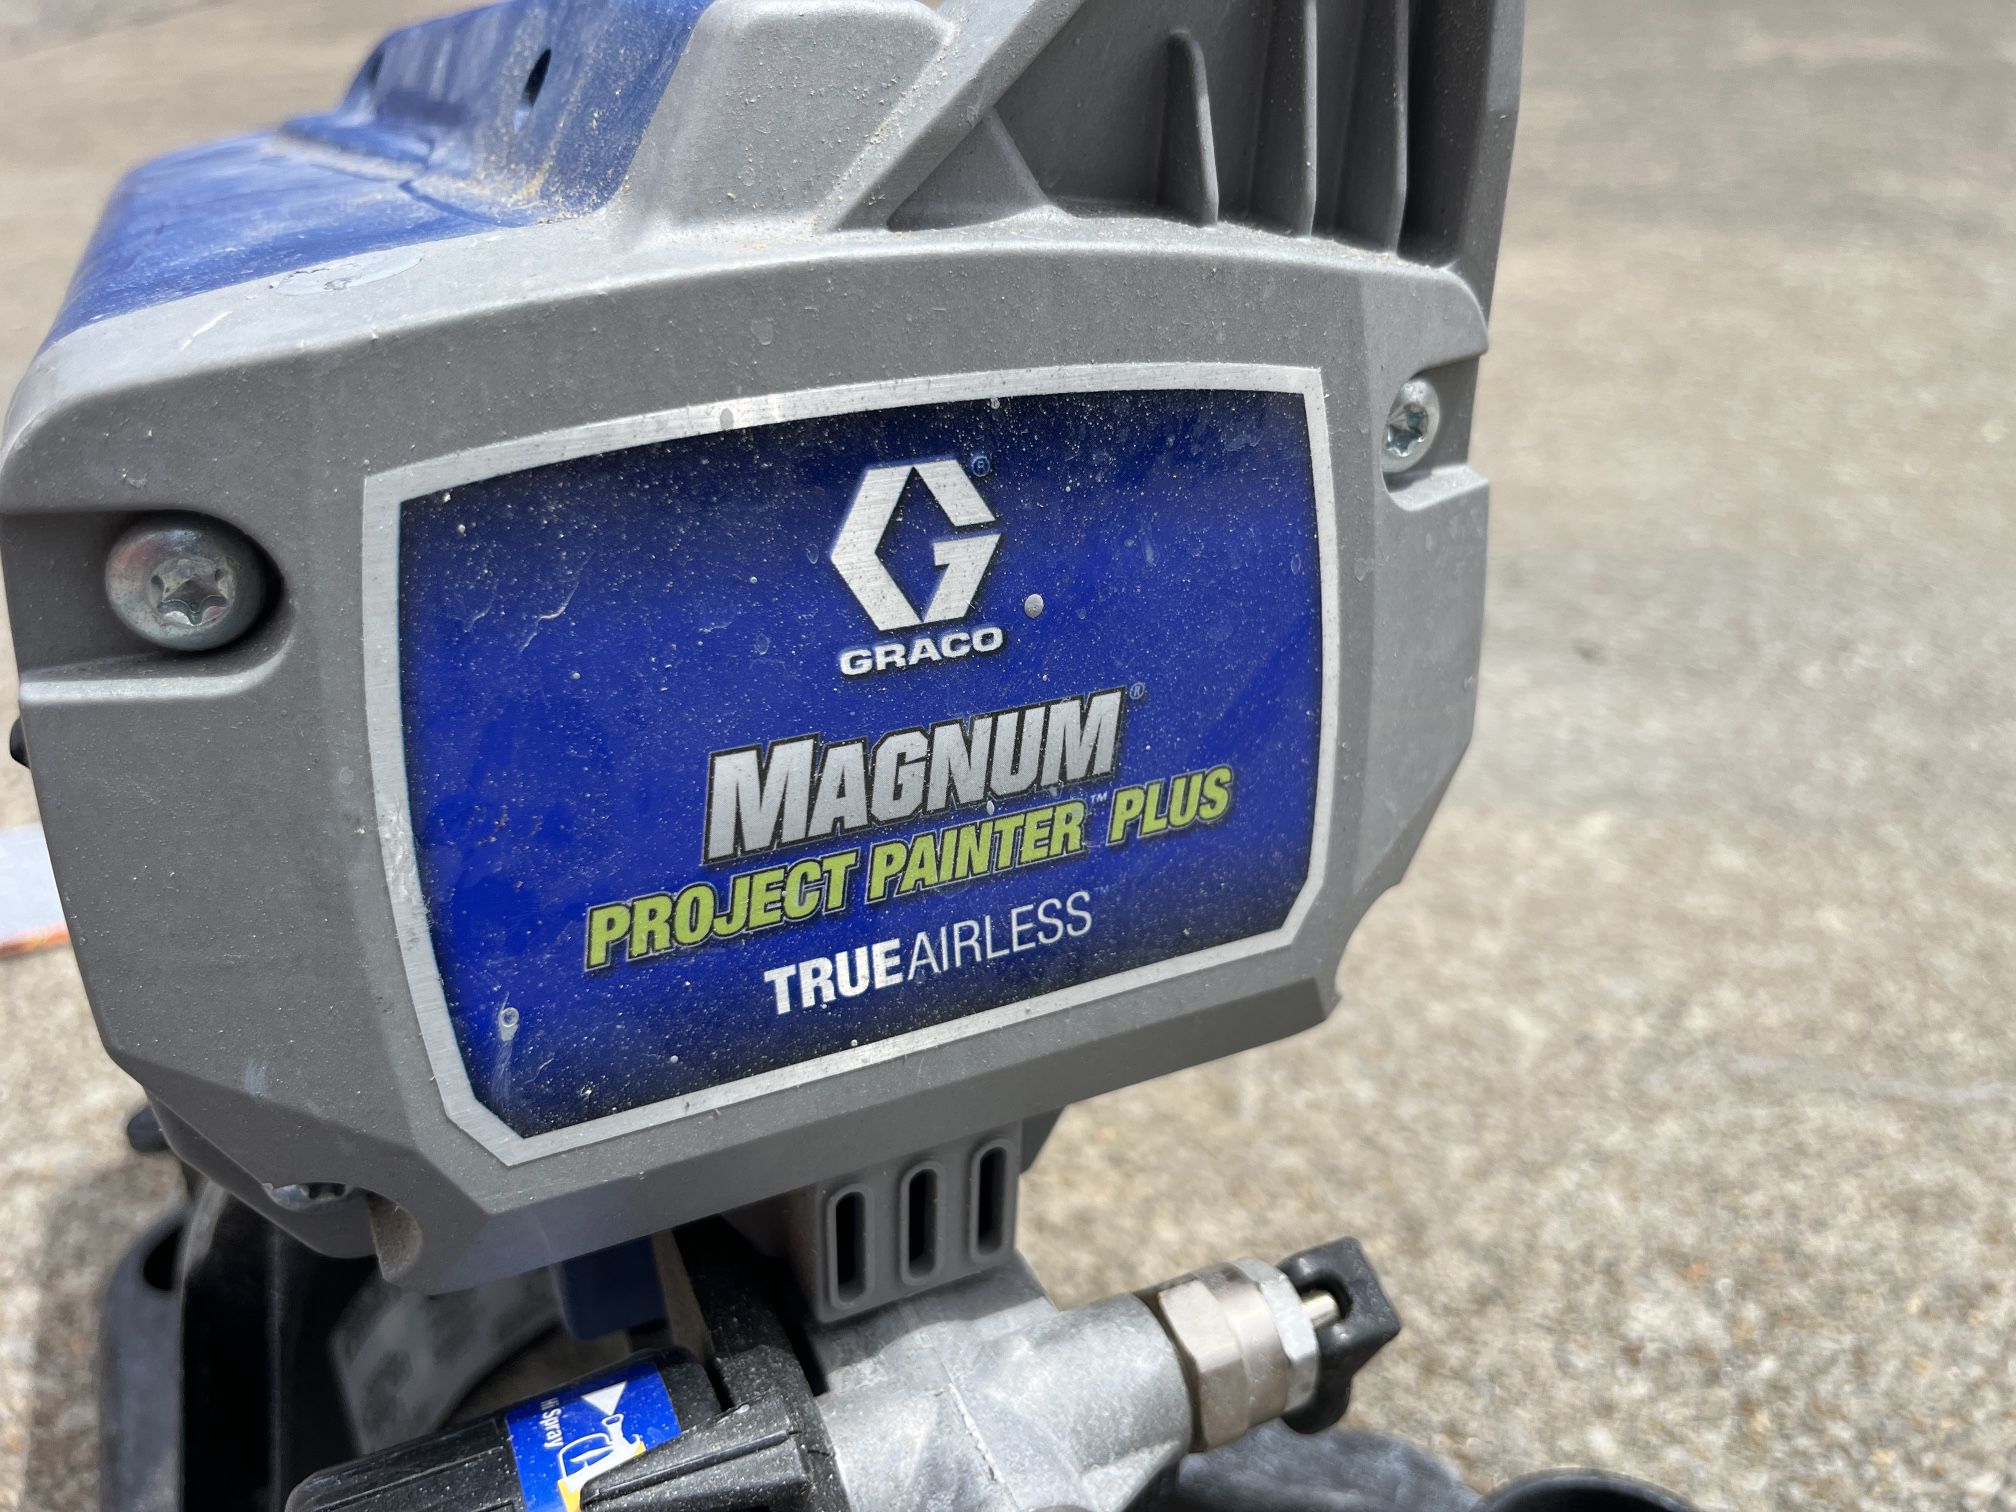 Graco Magnum Airless 2800 PSI Project Painter Plus Stand Paint Sprayer